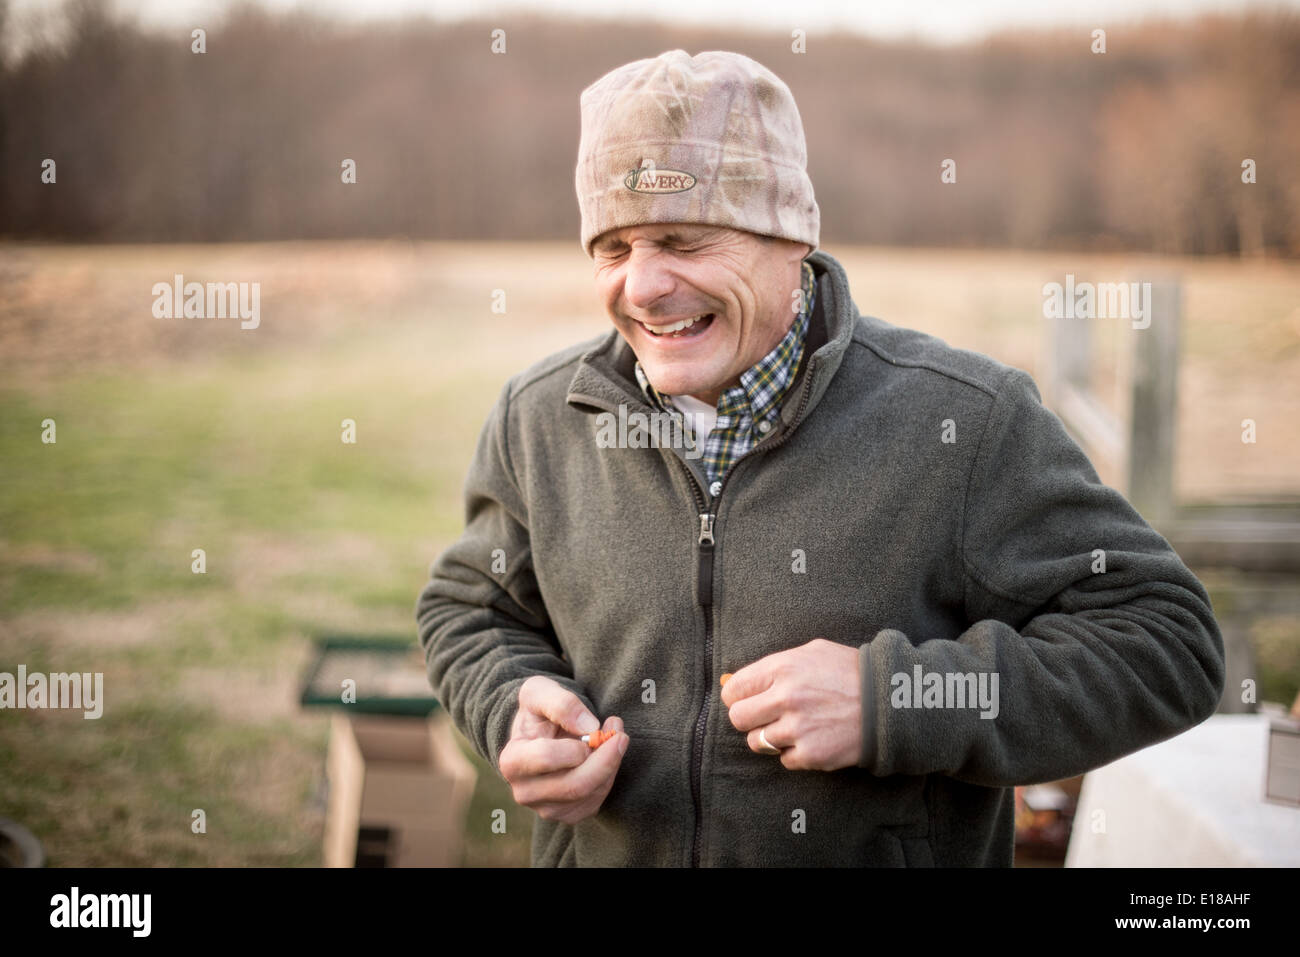 man holding ear plugs wincing after a gun fired in Bel Air, Maryland,USA Stock Photo